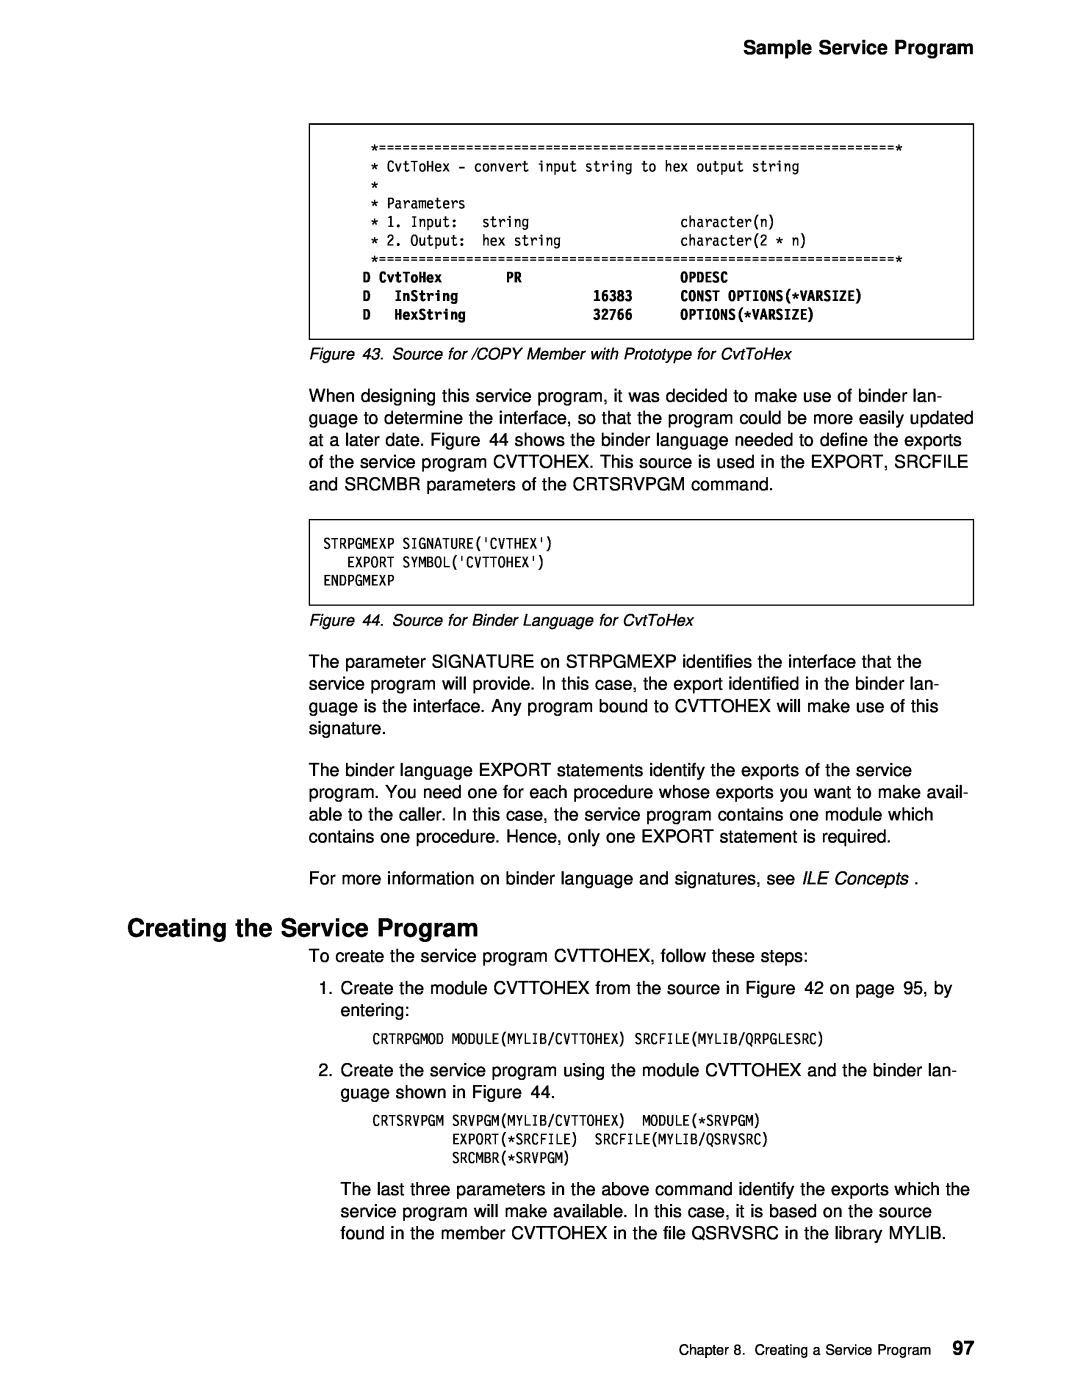 IBM AS/400 manual Creating the Service Program, Sample Service Program, Source for /COPY Member with Prototype for CvtToHex 